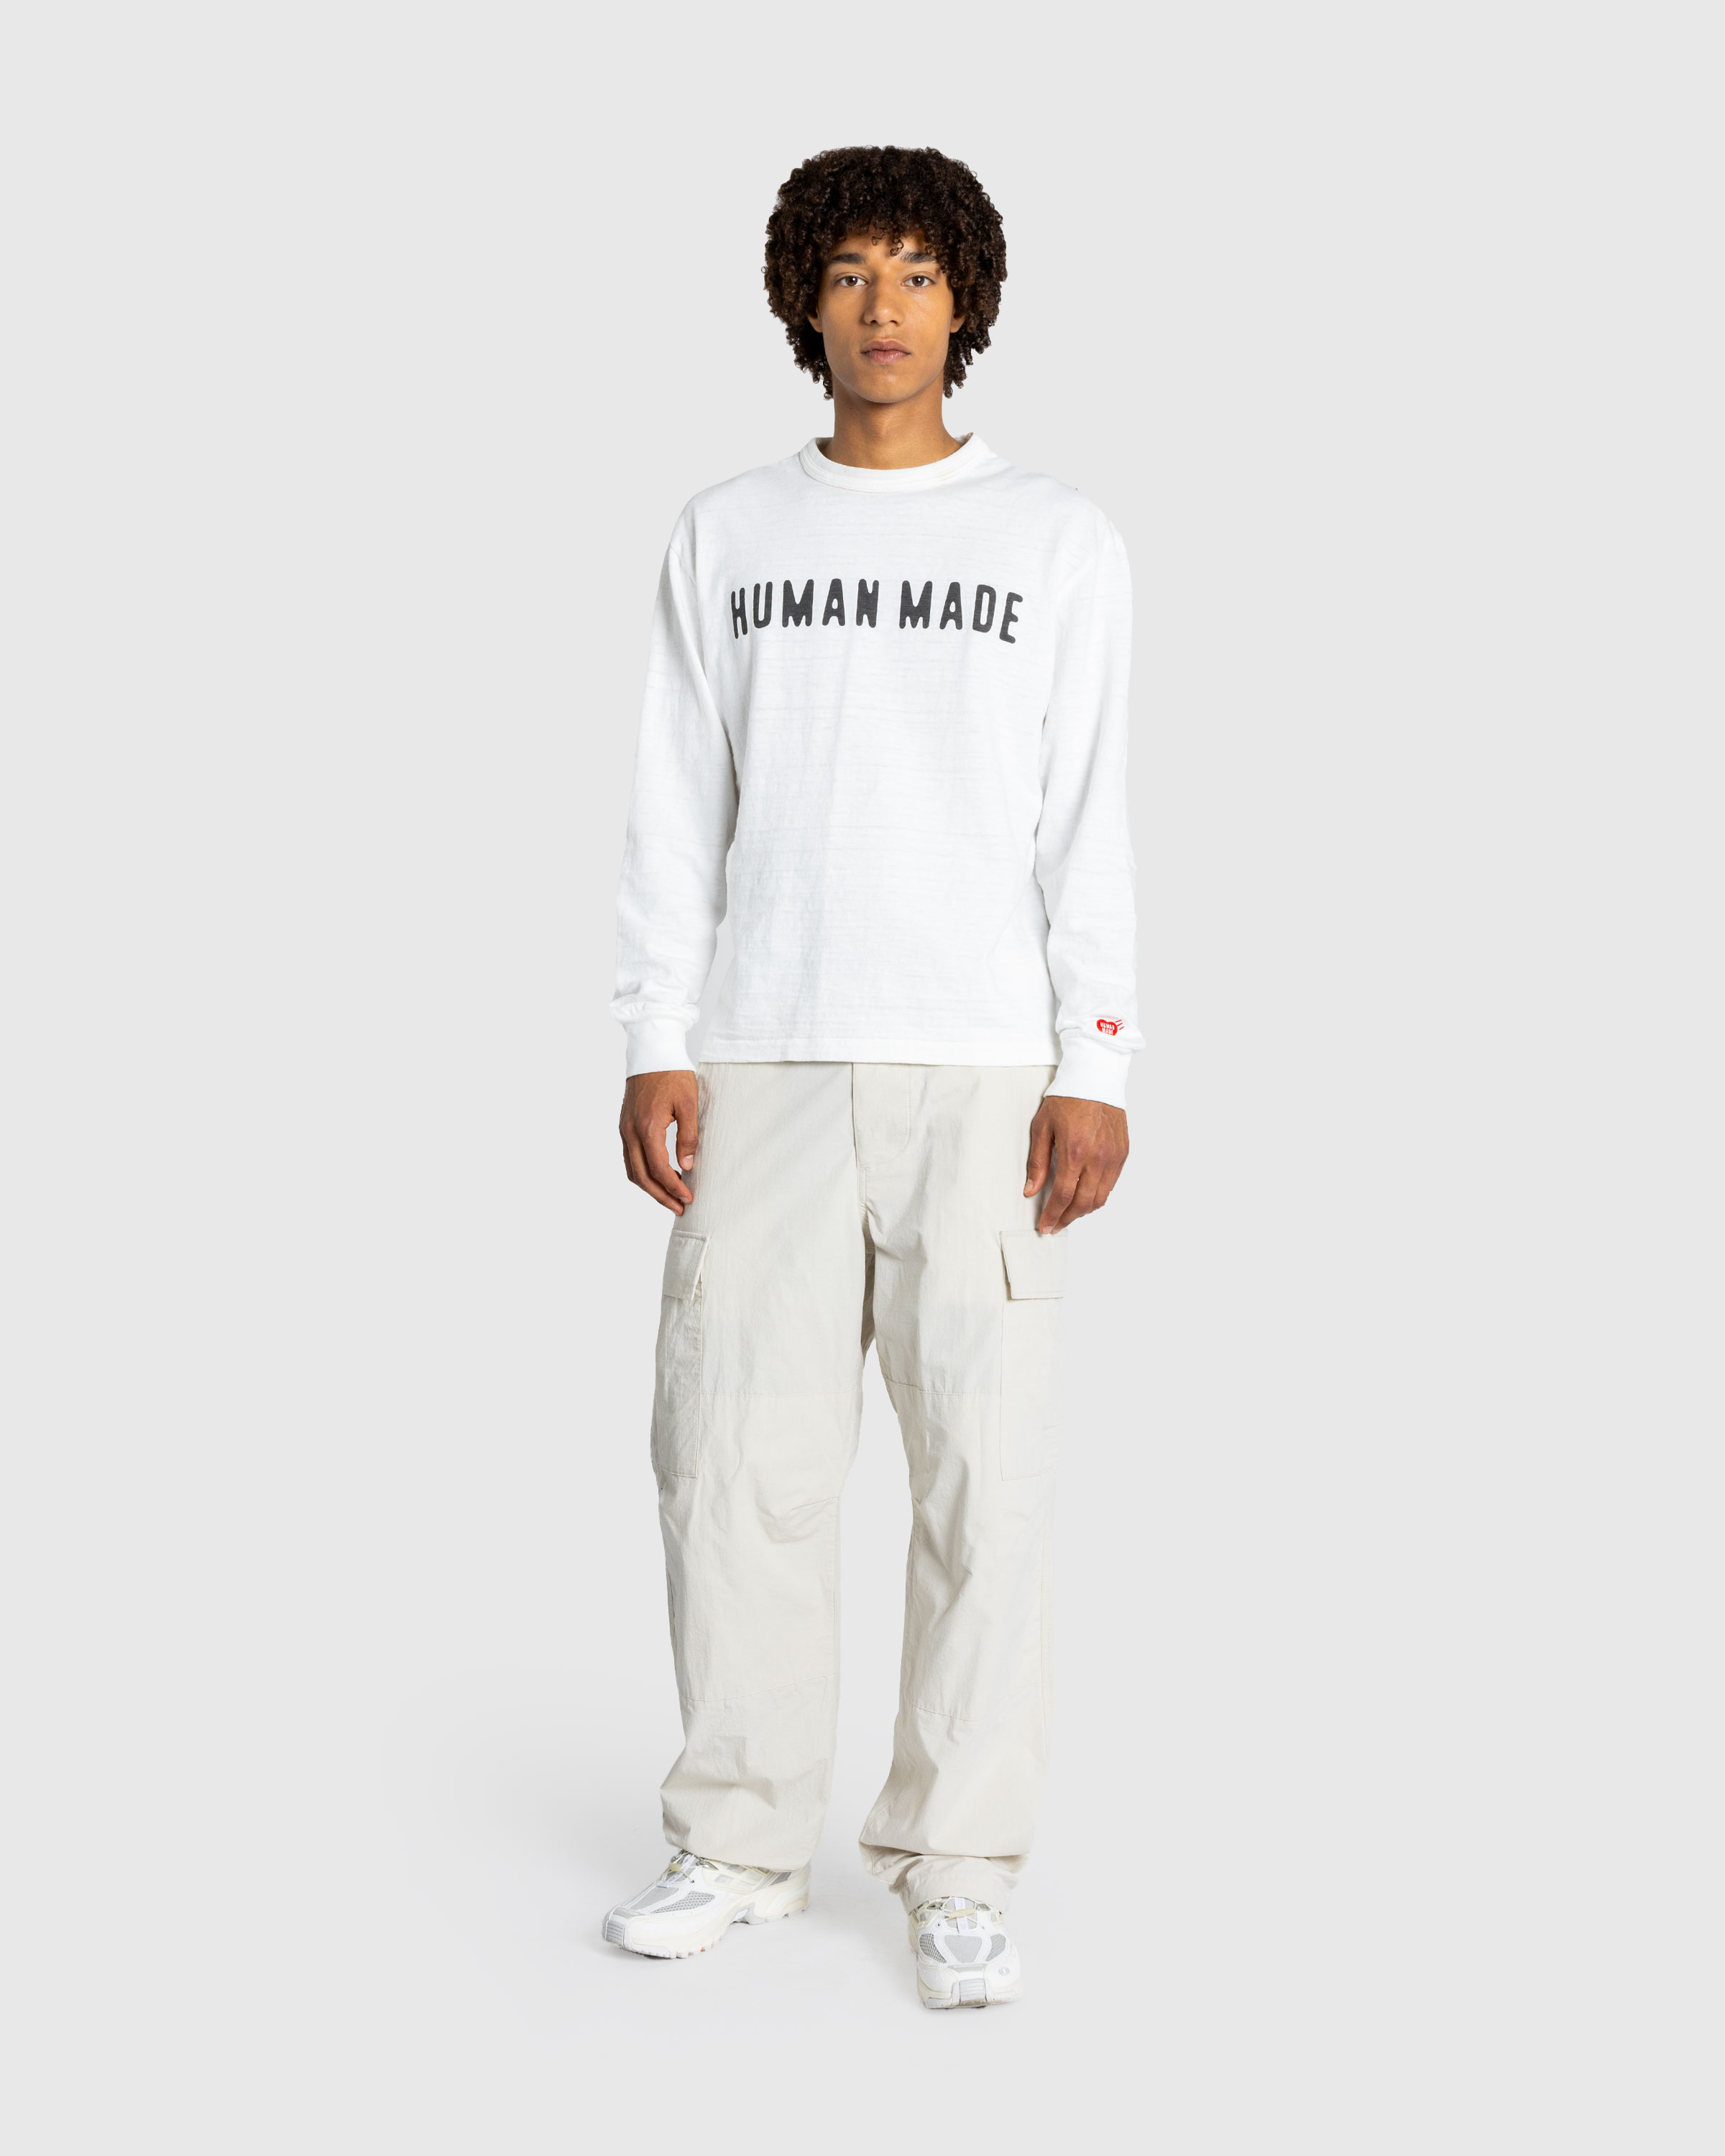 Human Made – Graphic L/S T-Shirt White | Highsnobiety Shop